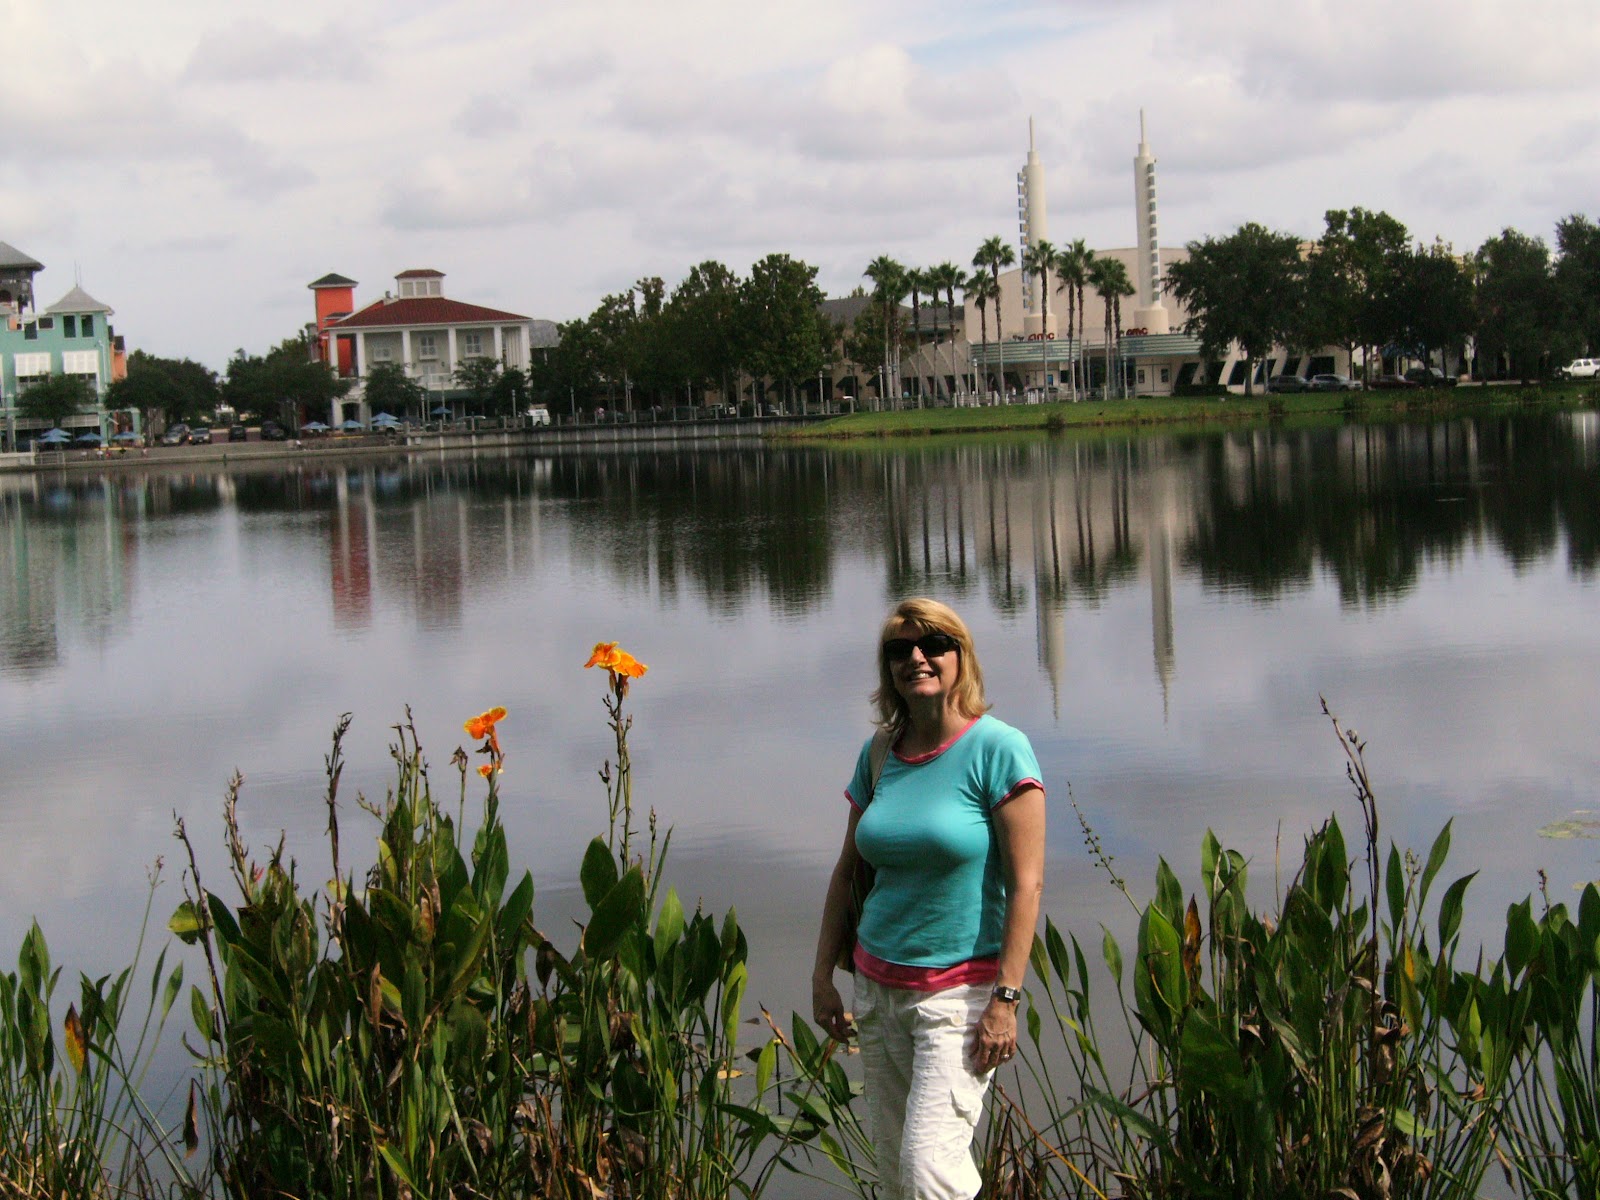 The Disney Fountain of Youth: OUR VISIT TO CELEBRATION, FL - "The Town